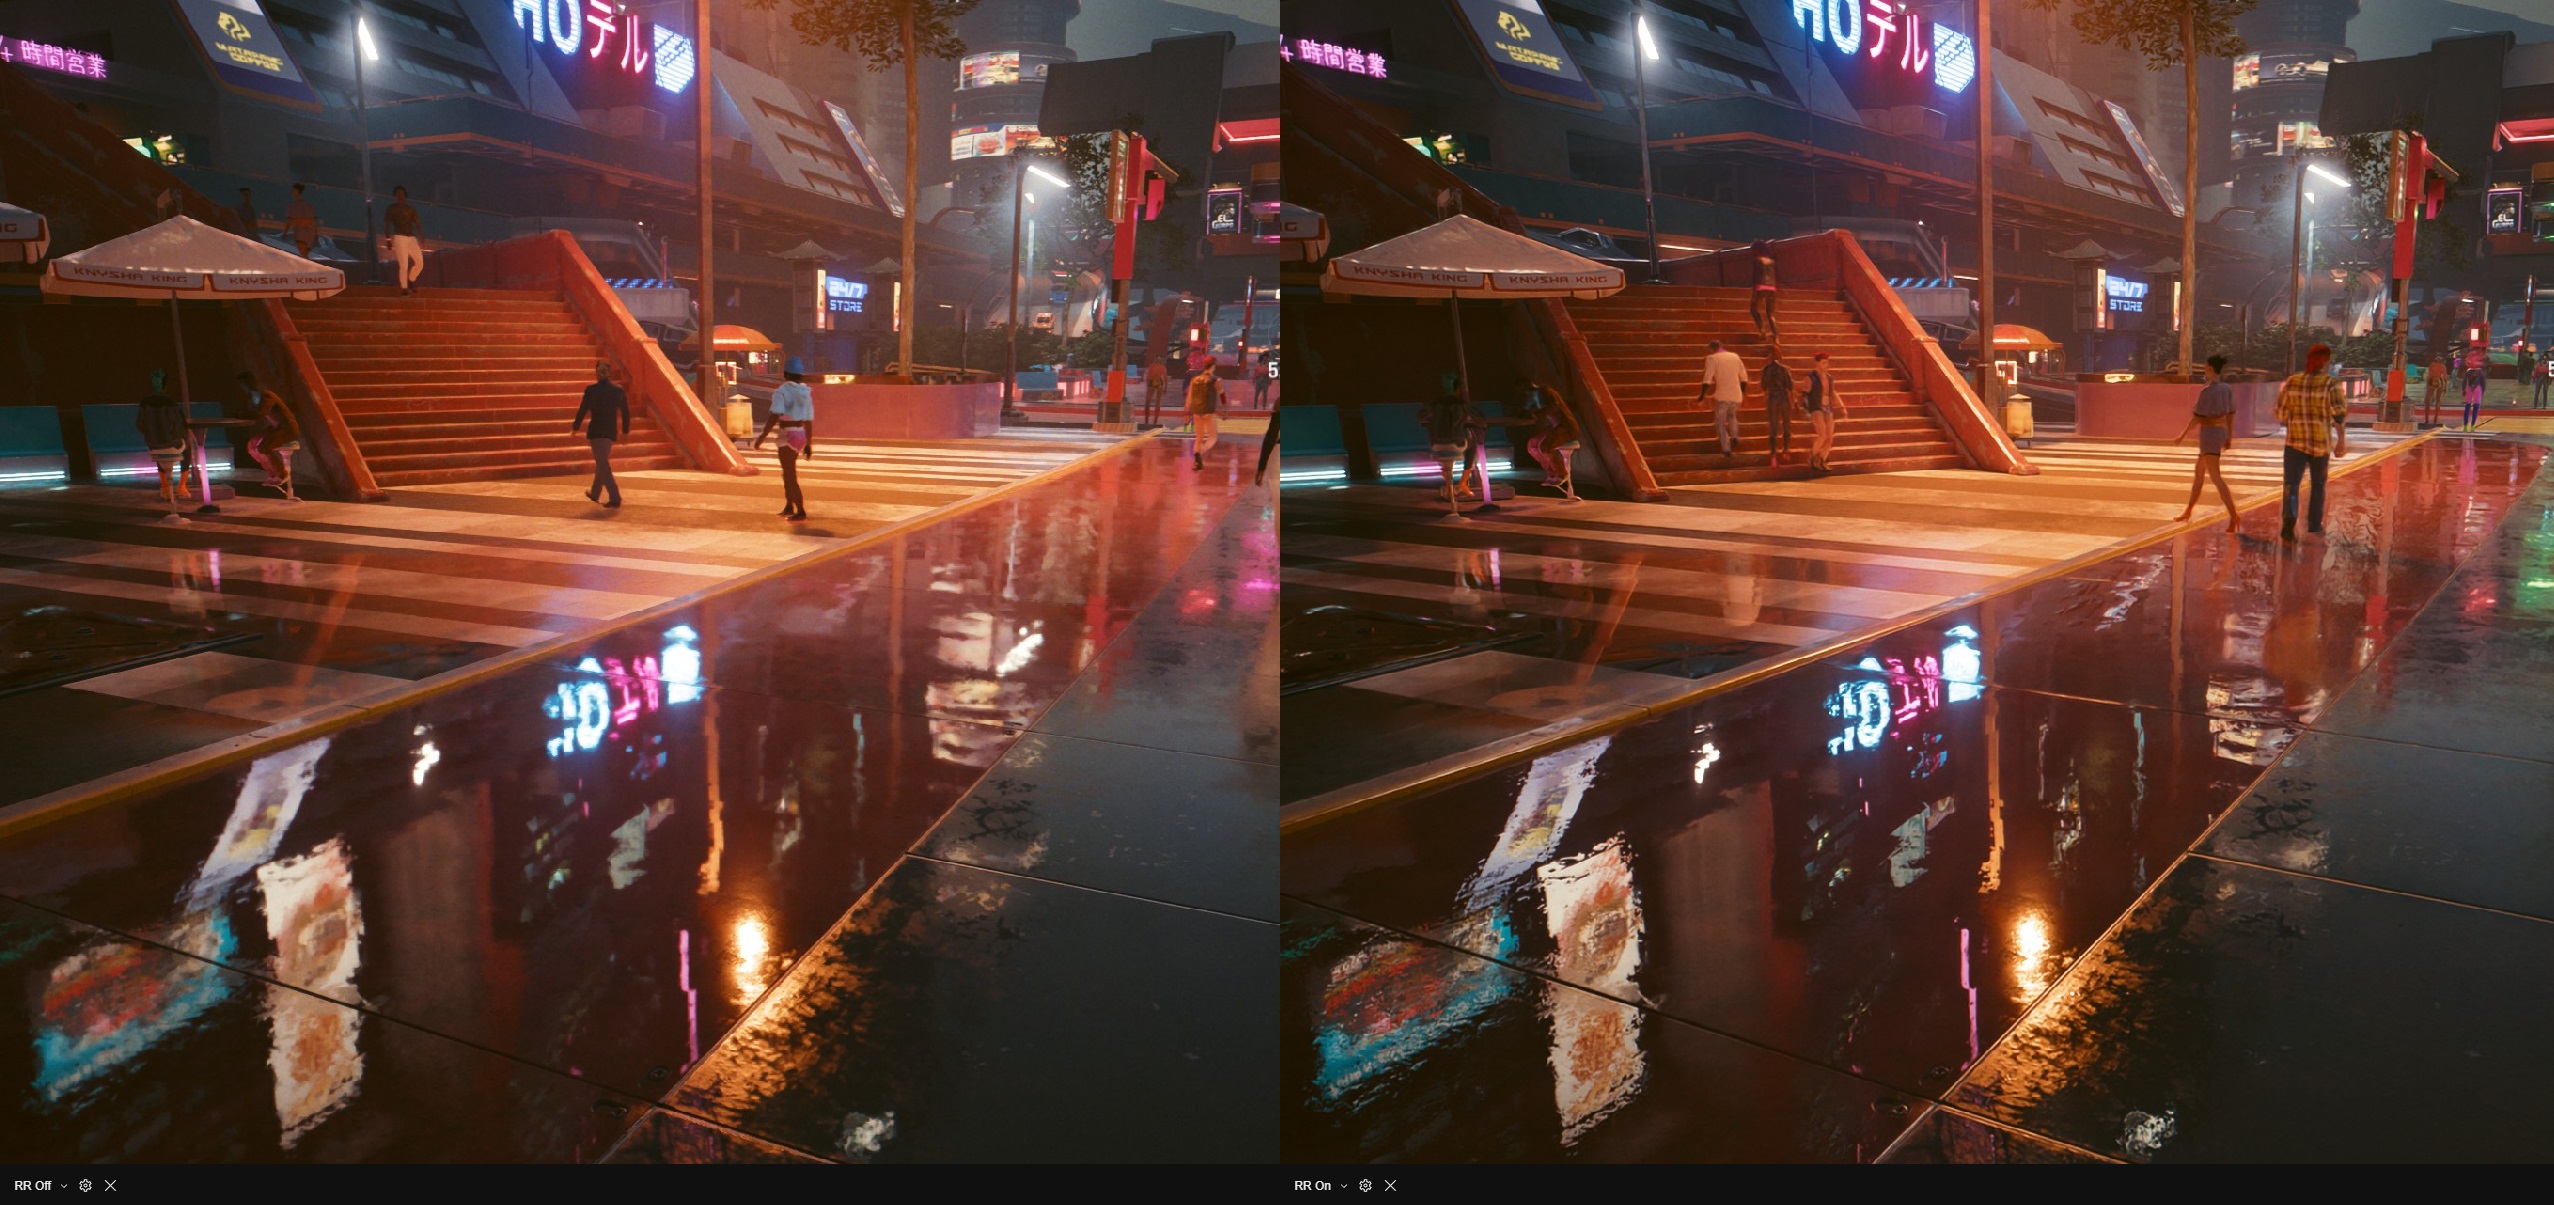 New Cyberpunk 2077 Path Tracing Update Is Live Now, But Only For Some Cards